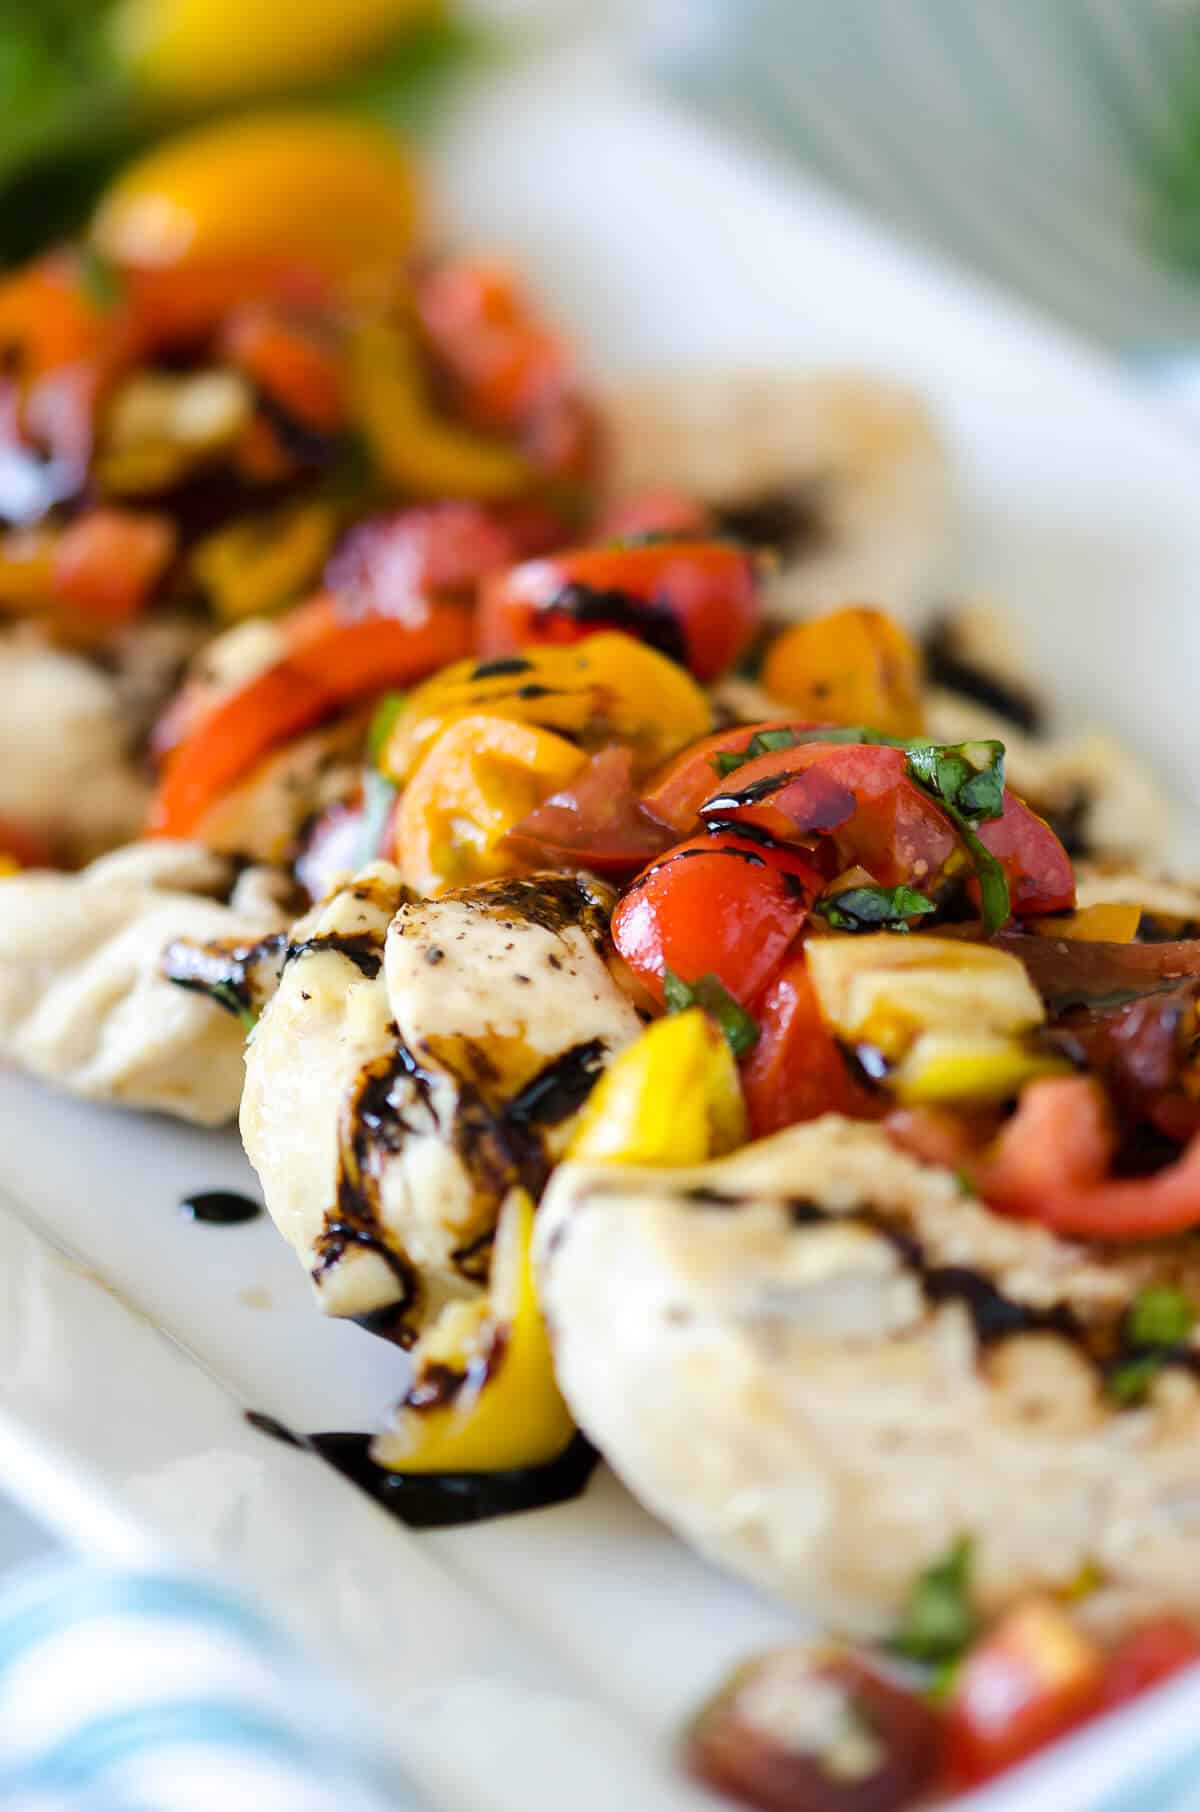 Chicken breasts topped with red, orange and yellow tomatoes and fresh basil marinated in olive oil and balsamic vinegar